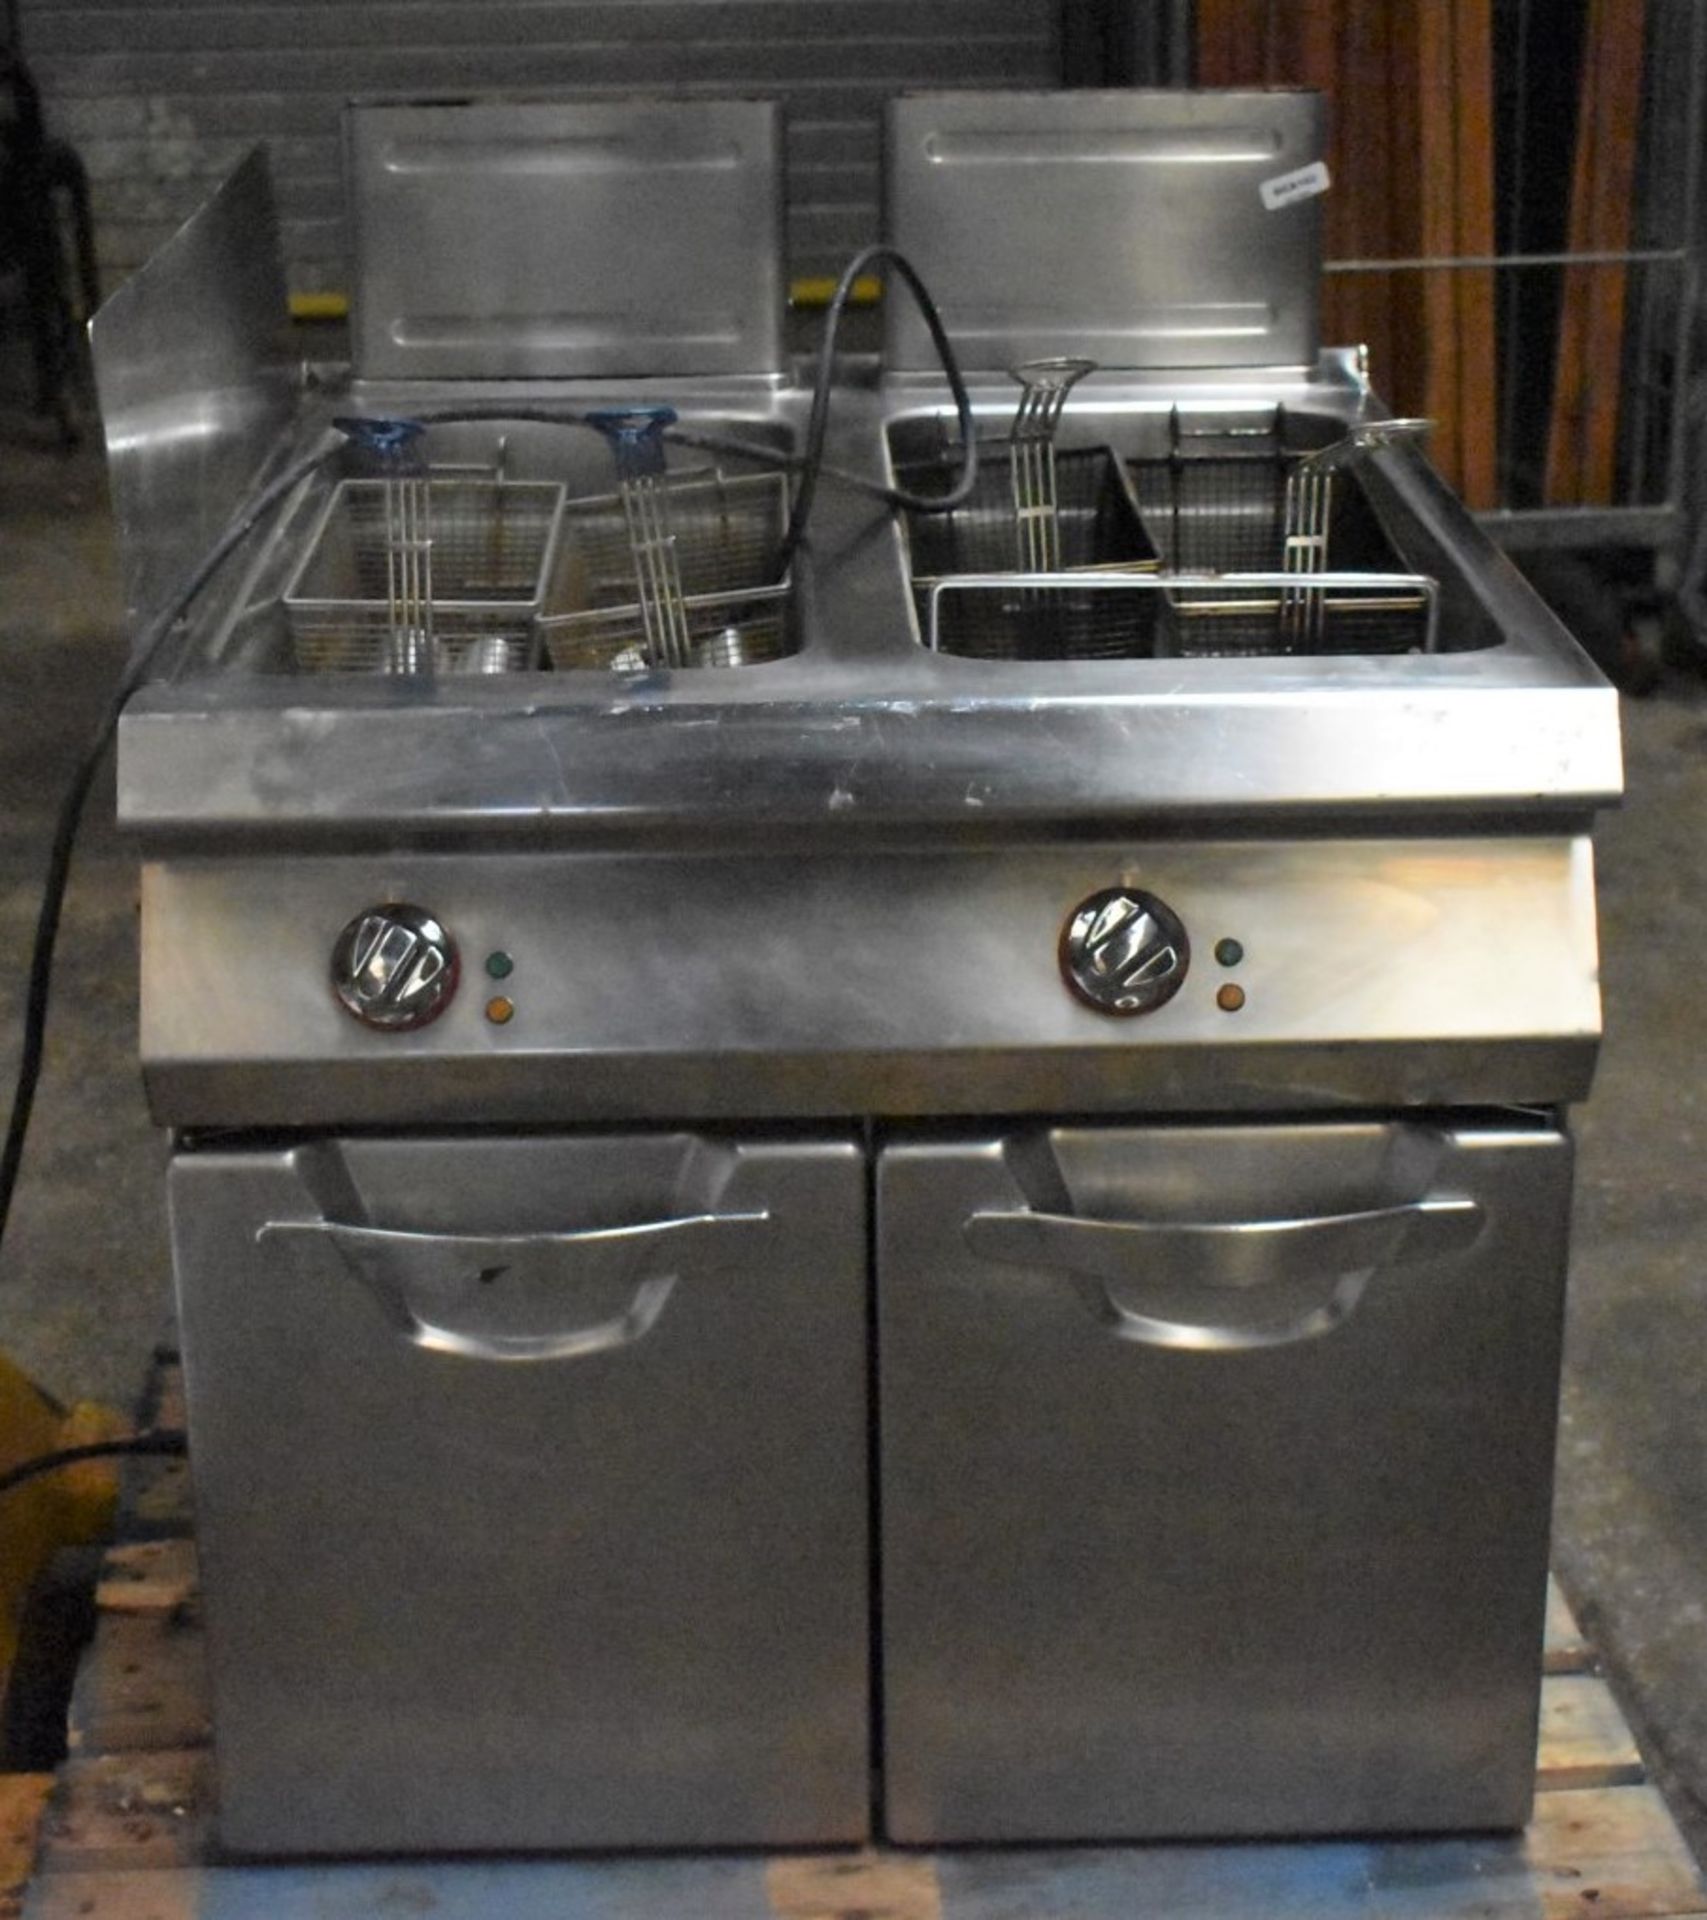 1 x Angelo Po Twin Tank Commercial Fryer - Includes Baskets - Removed From a Commercial Kitchen